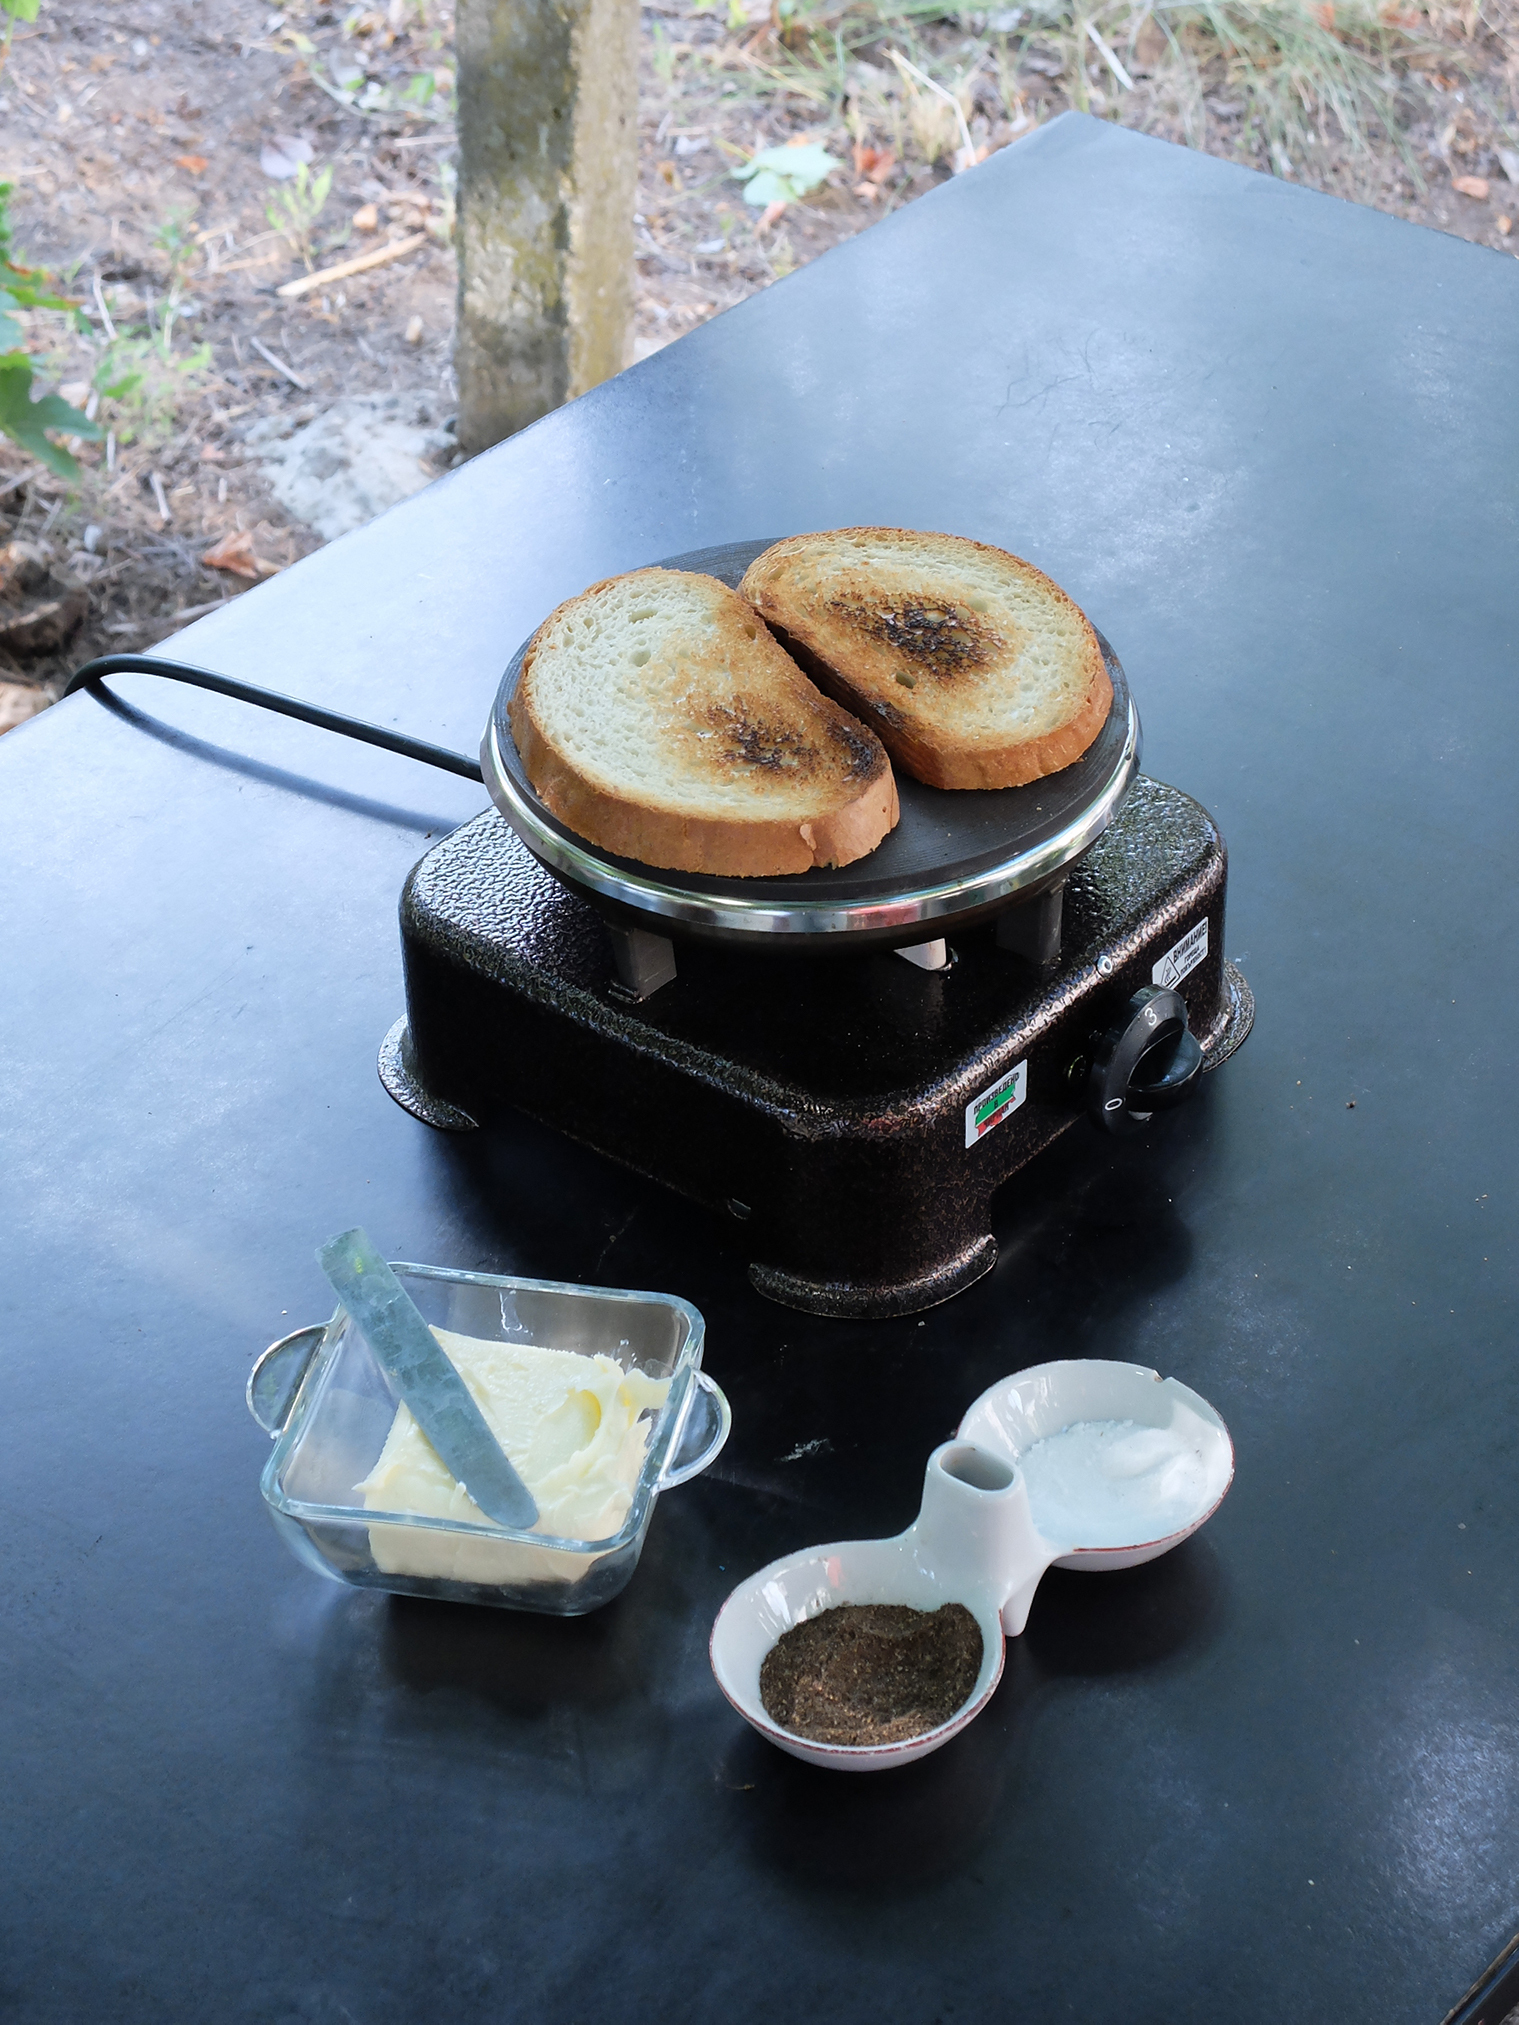 Ivan Moudov, Recipe: Bread toasted on an old electric stove with butter and salt, portable single electric hotplate from baba Vasa's kitchen, cooked by Laurenz and the visitors